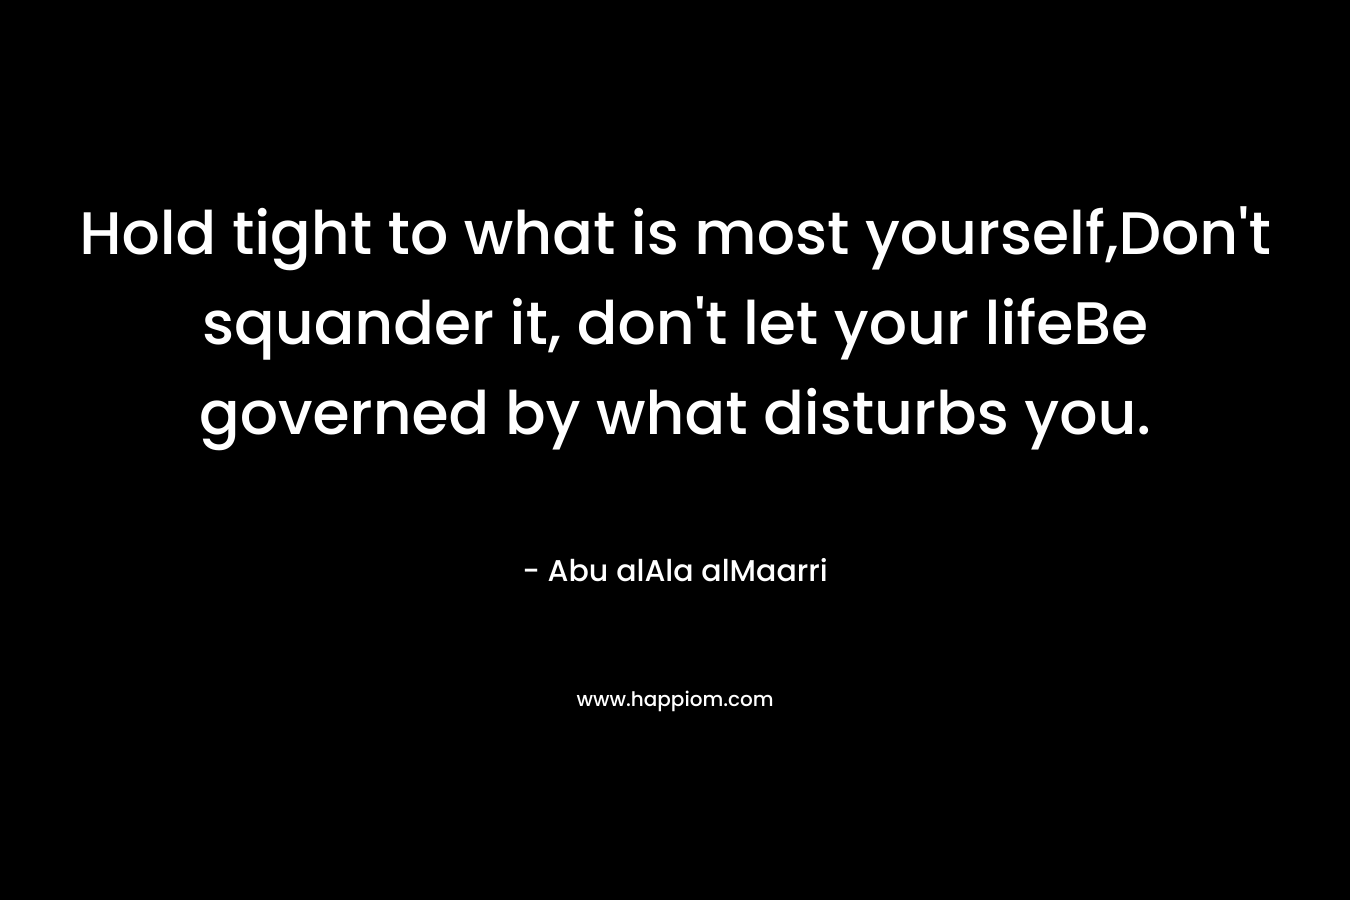 Hold tight to what is most yourself,Don’t squander it, don’t let your lifeBe governed by what disturbs you. – Abu alAla alMaarri